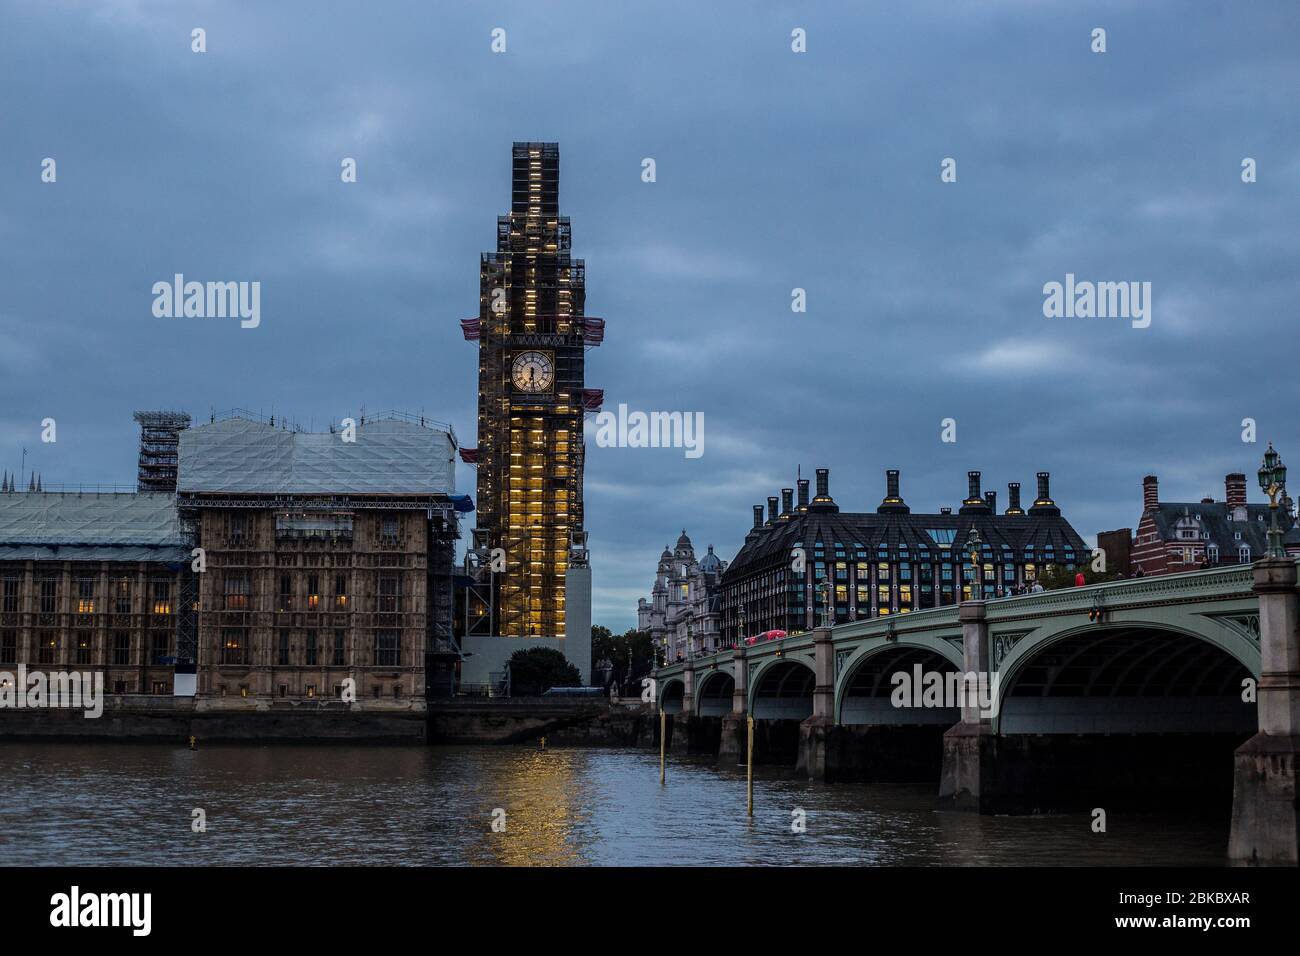 London, UK - October 8, 2018: View of Big Ben under Construction and Houses of Parliament at Sunset Stock Photo